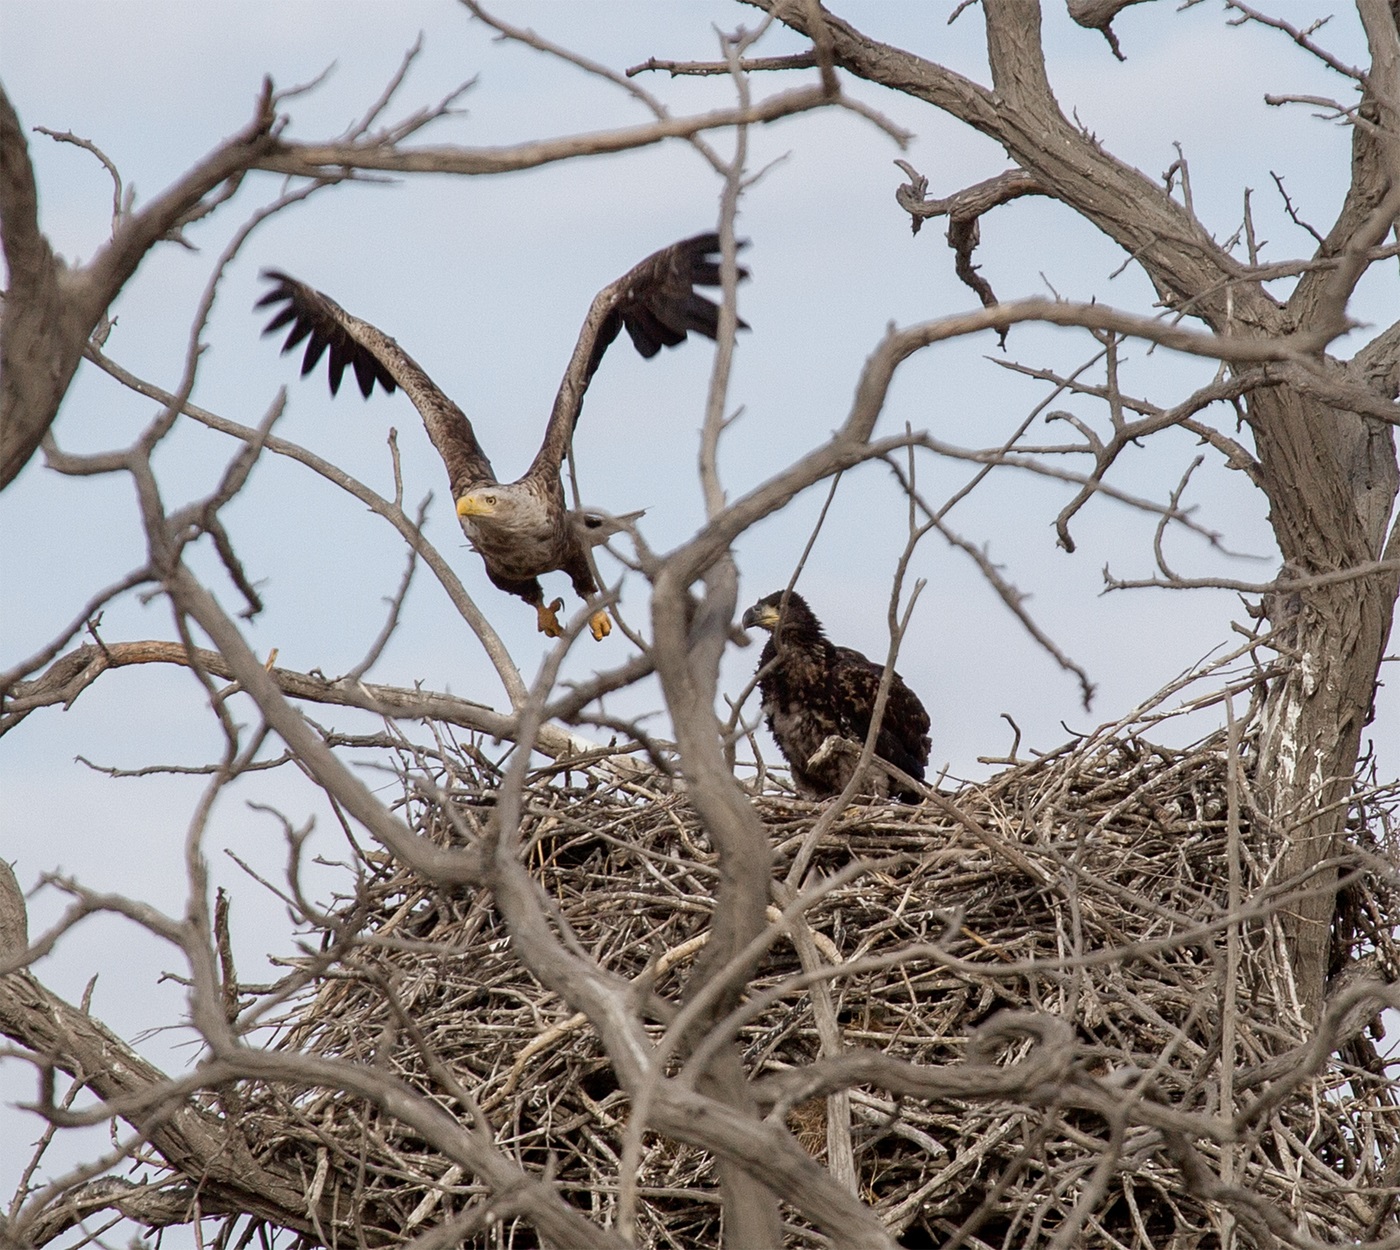 Adult white-tailed eagle with a single maturing chick in the nest